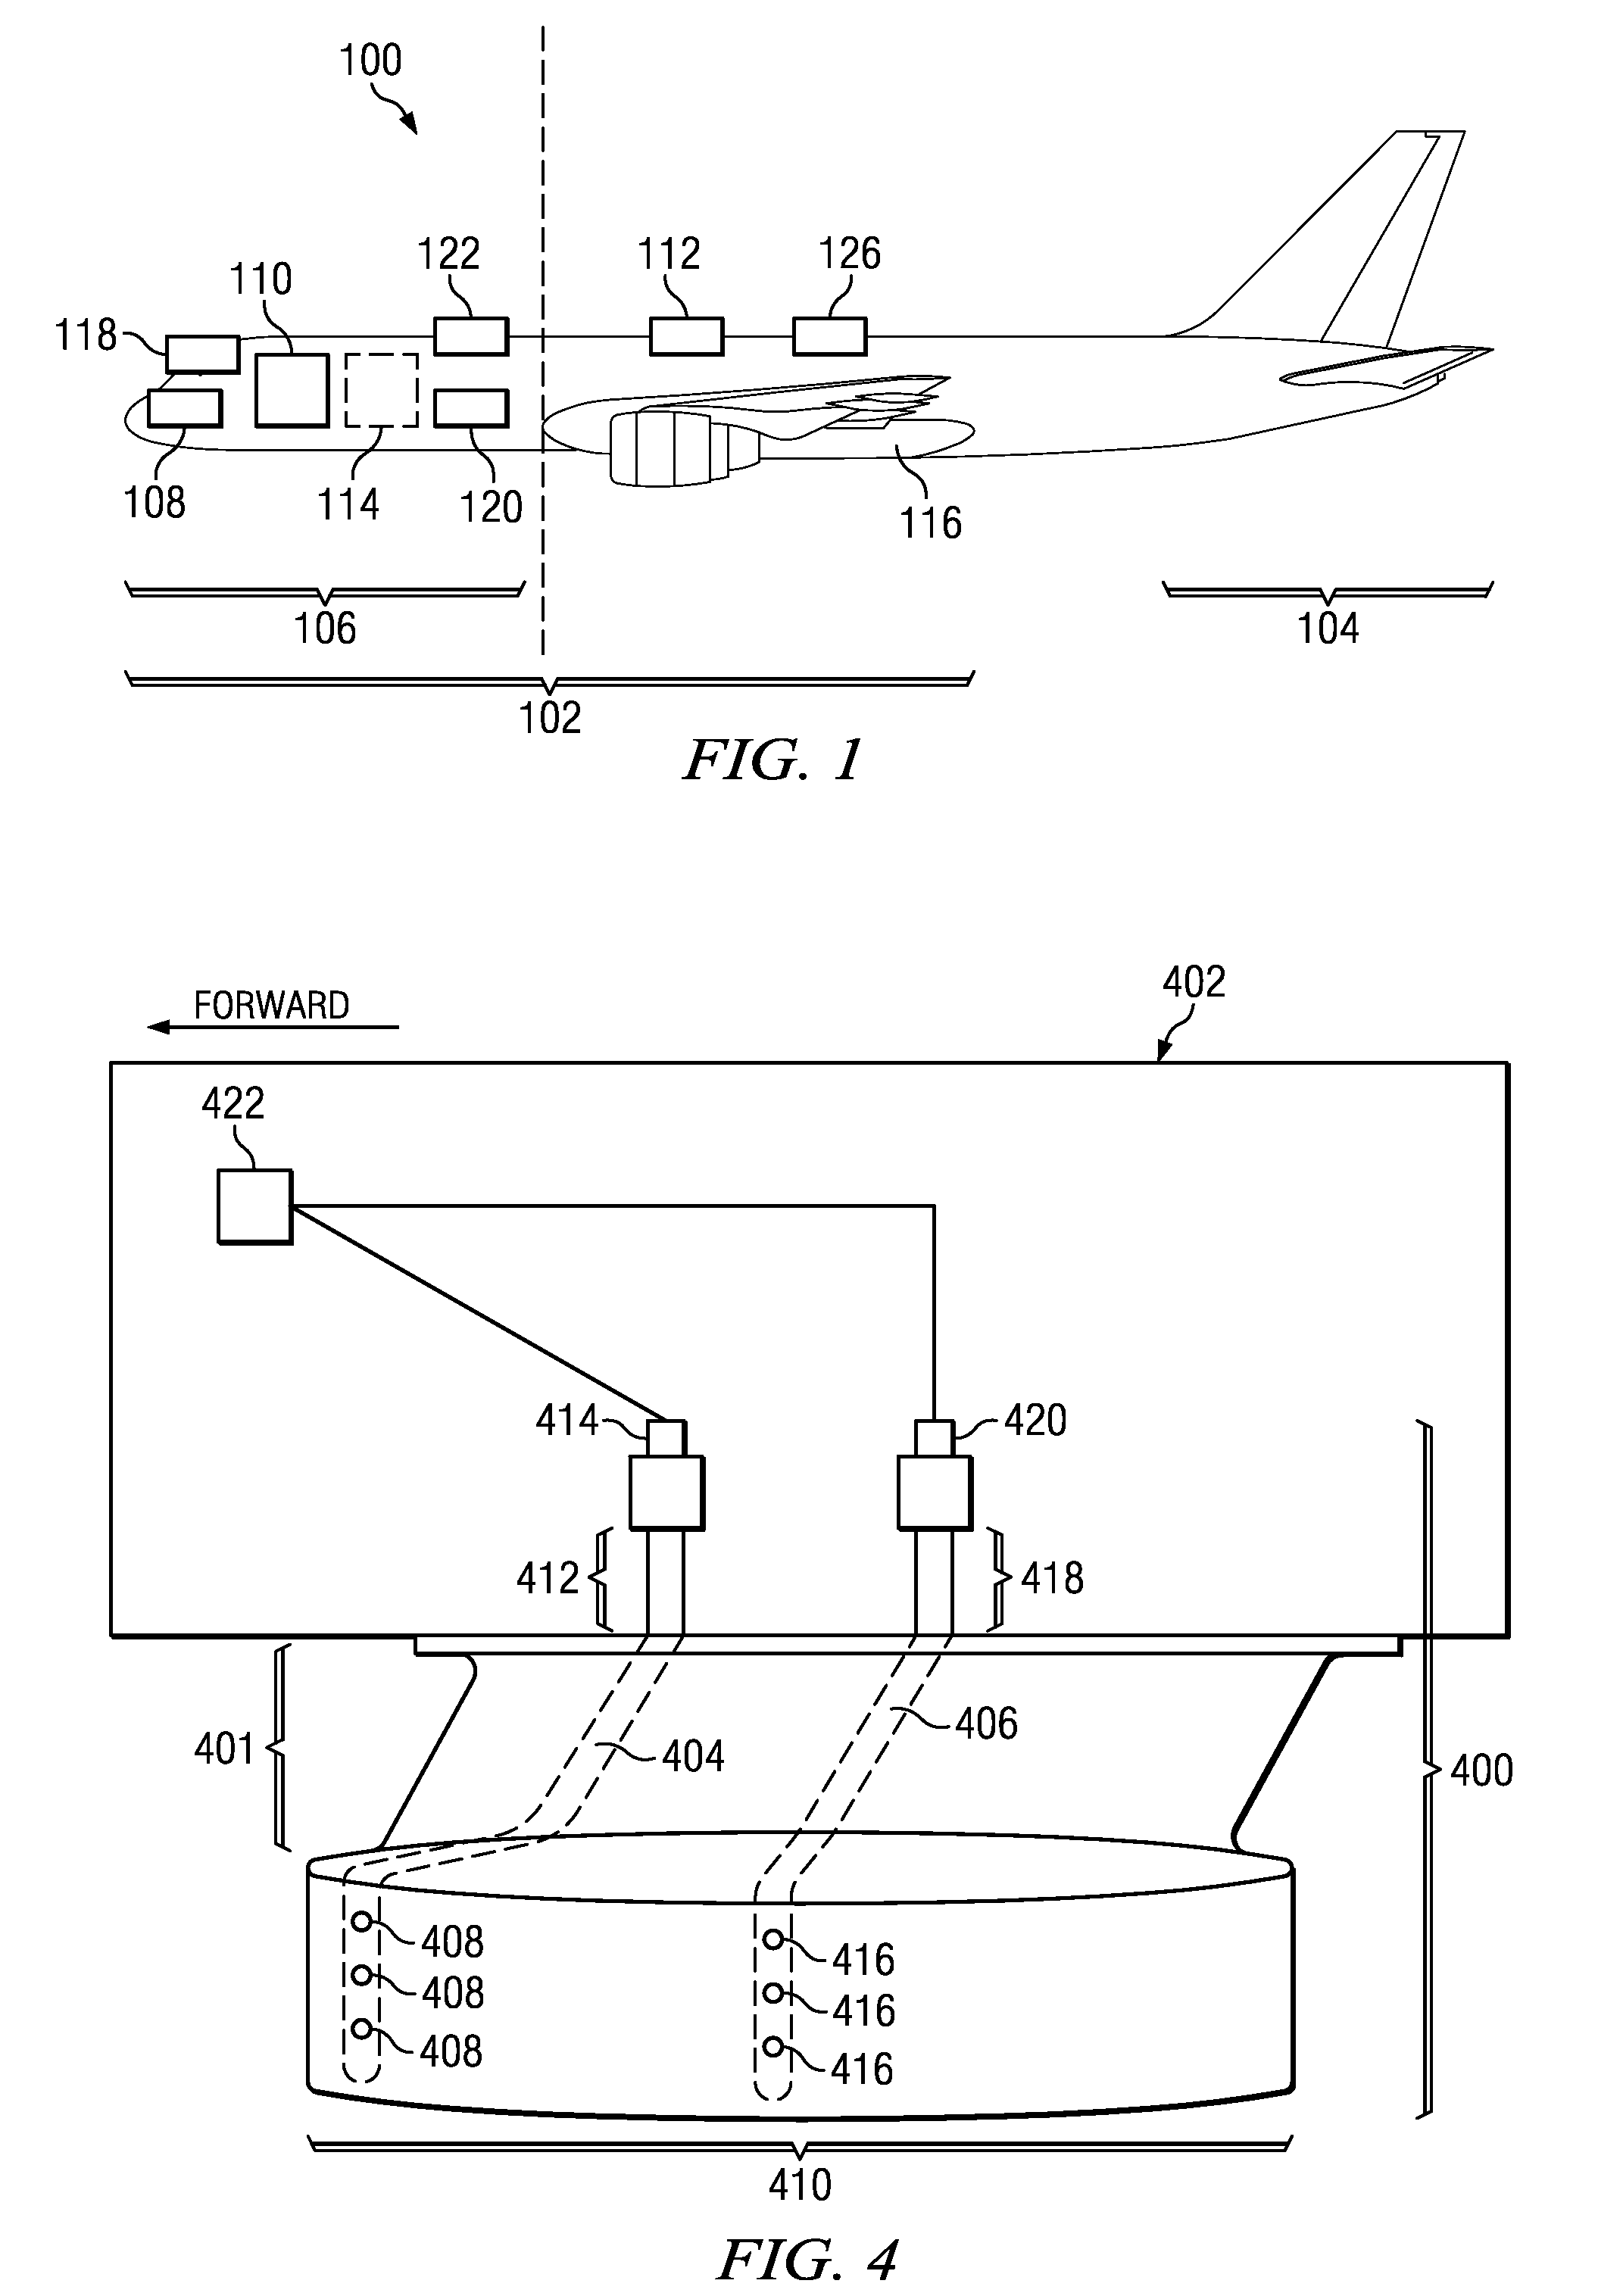 Airspeed sensing system for an aircraft